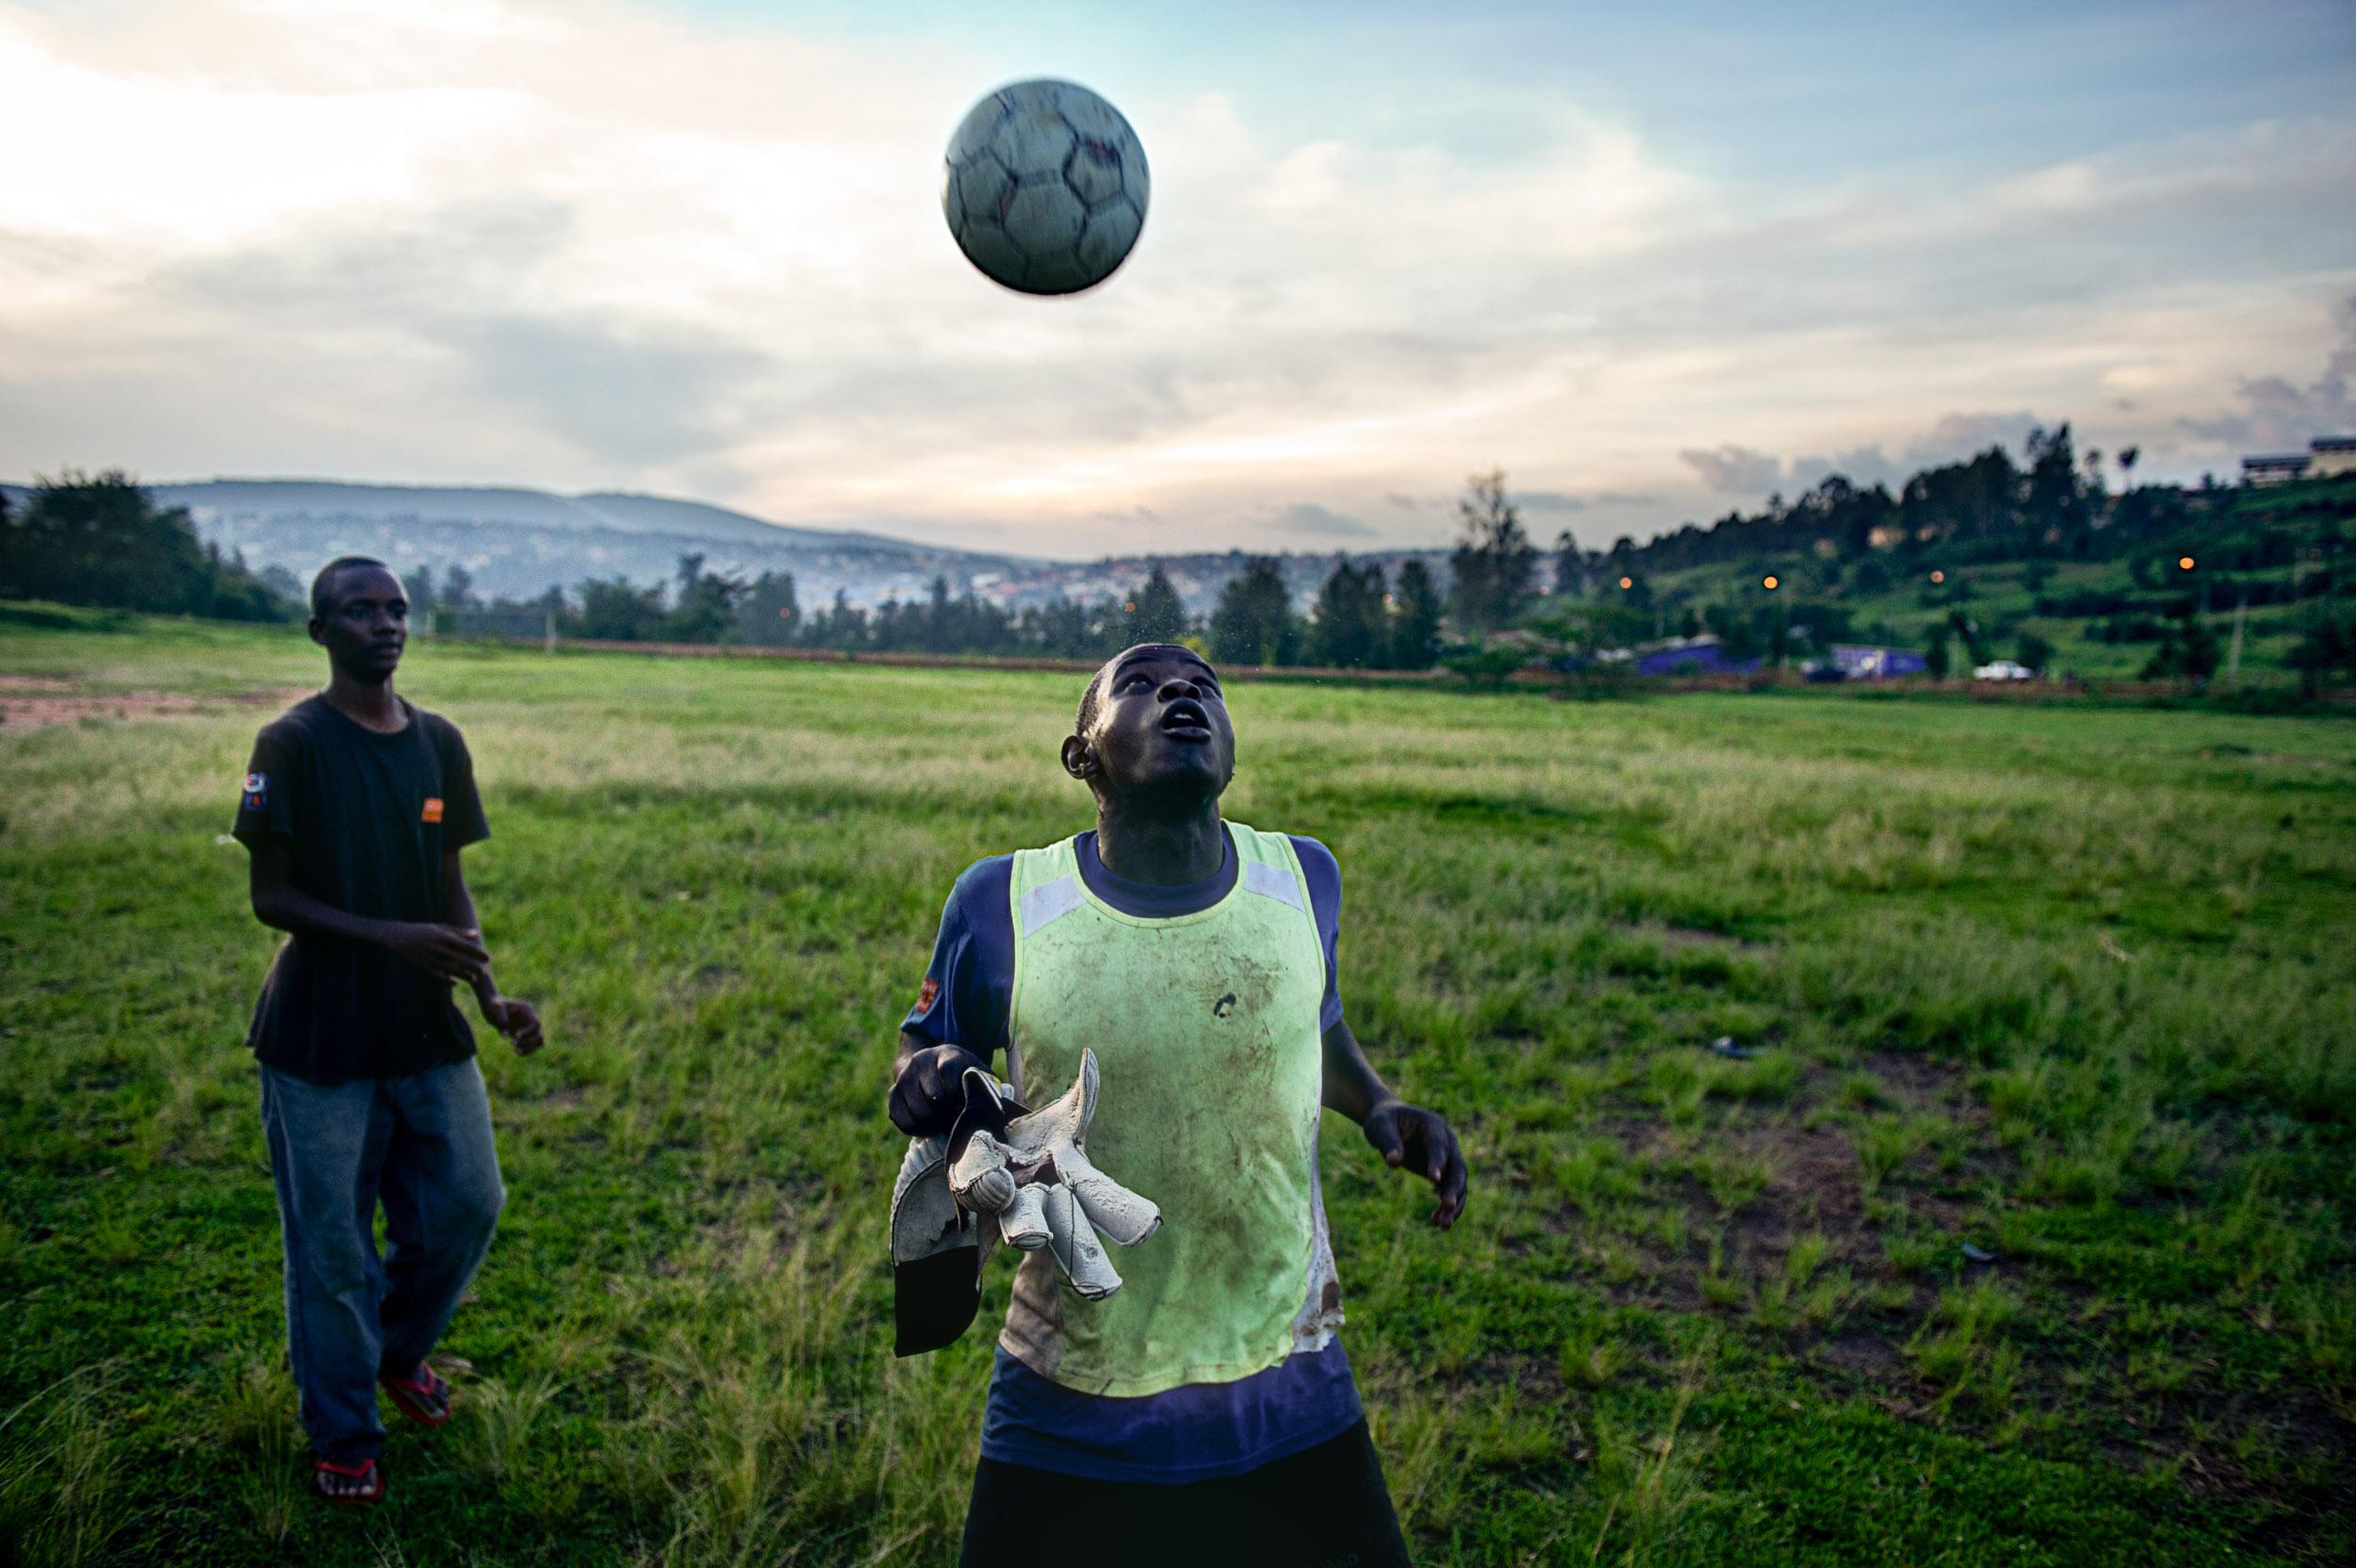  Soccer consumes the interest and pastimes of most young males in Kigali, the capital. 